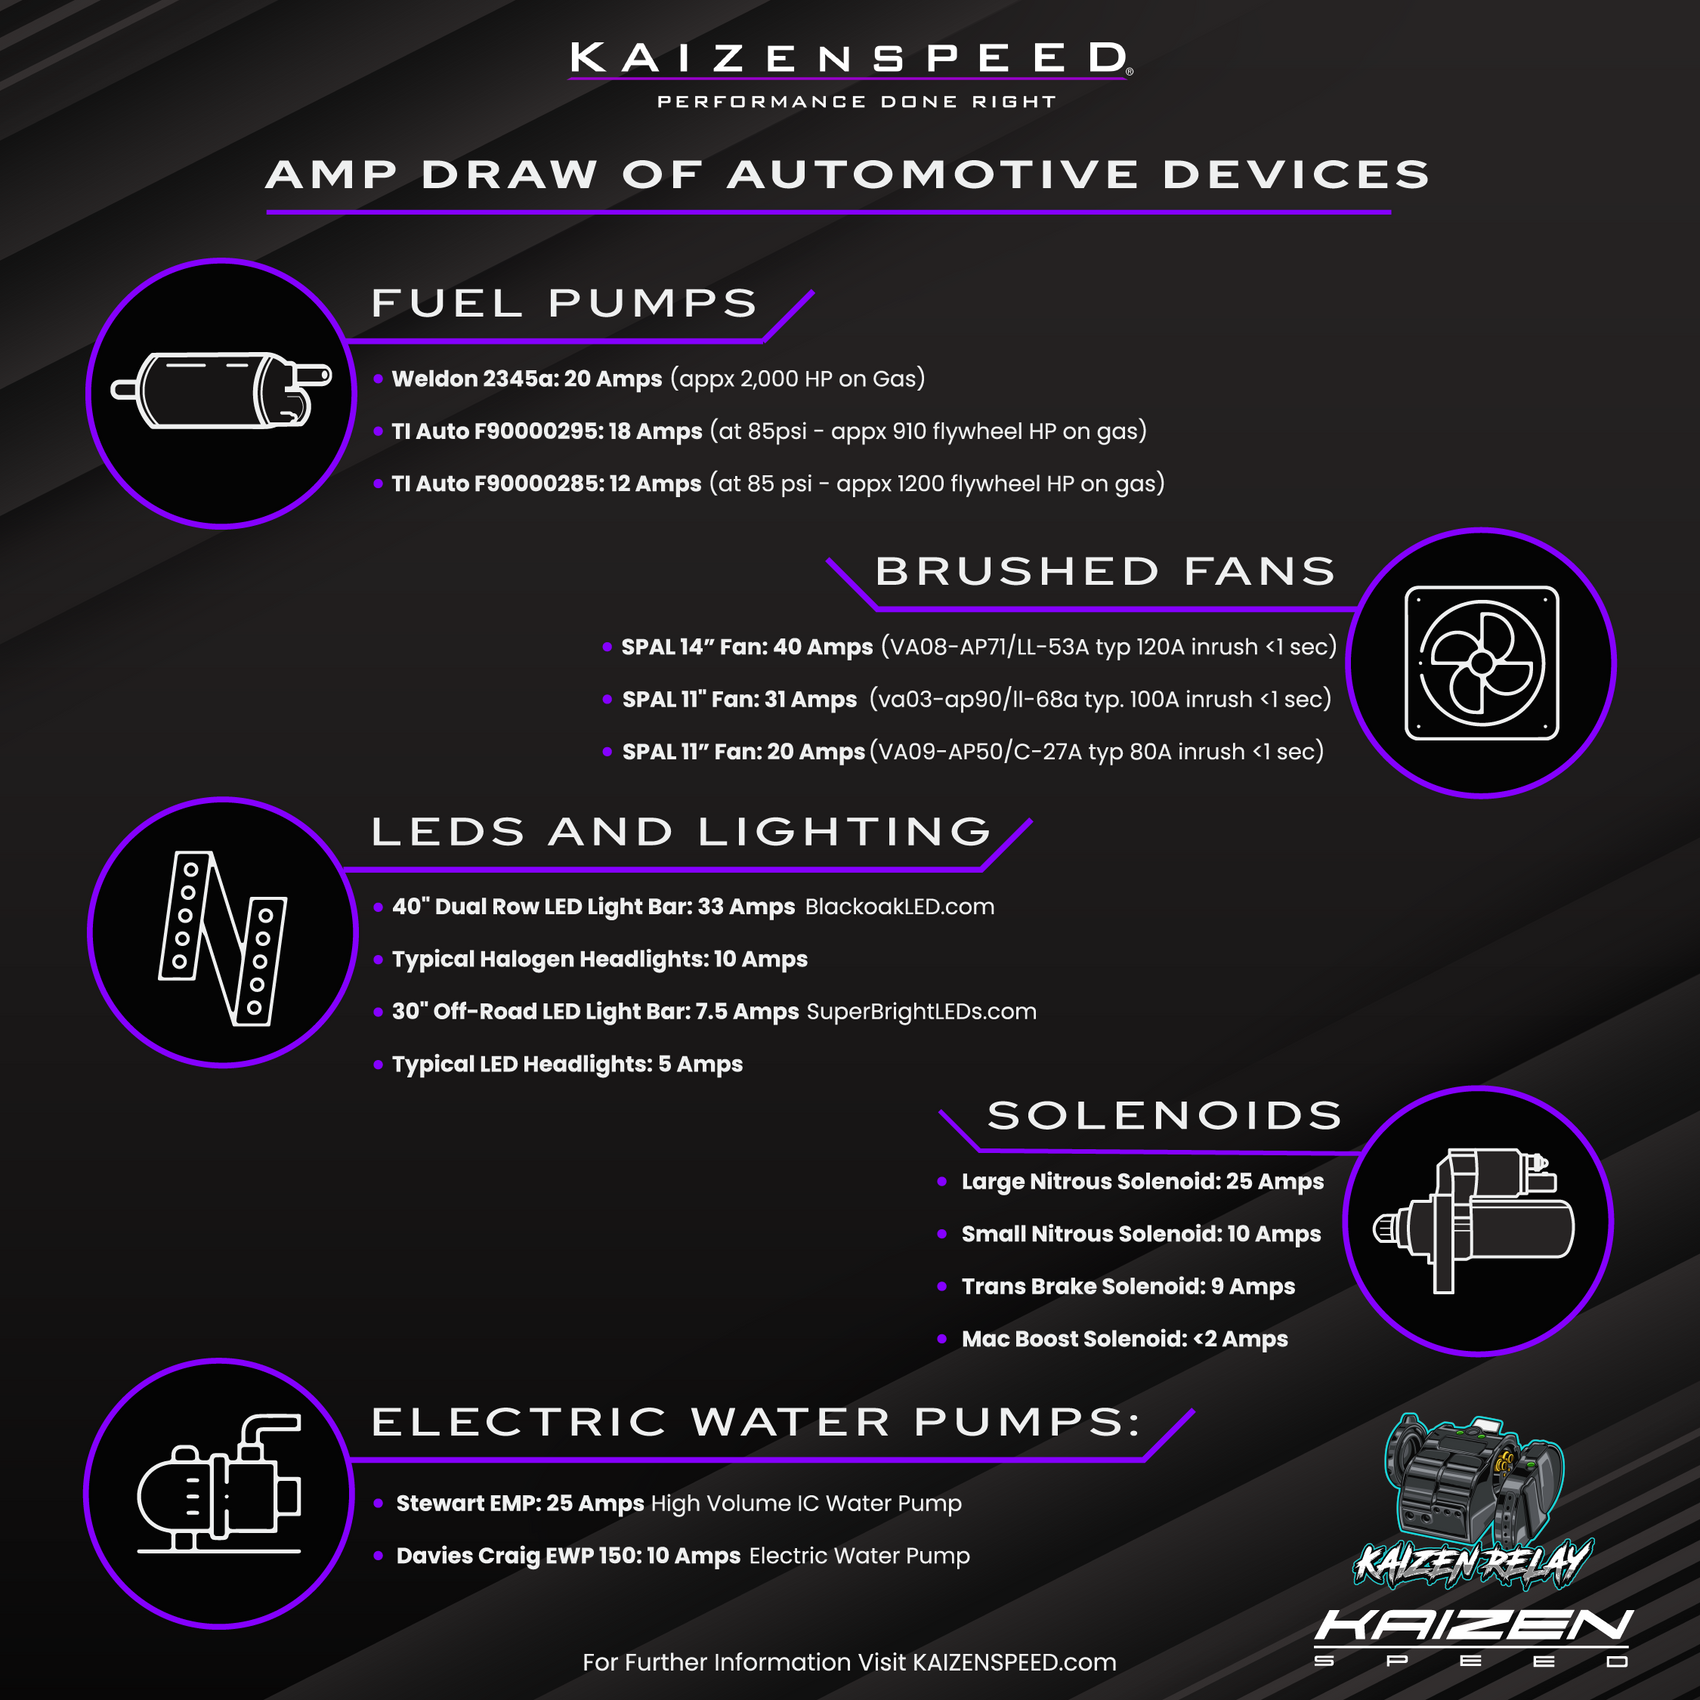 How Much Current? Amp Draw of Automotive Devices Infographic by Kaizen